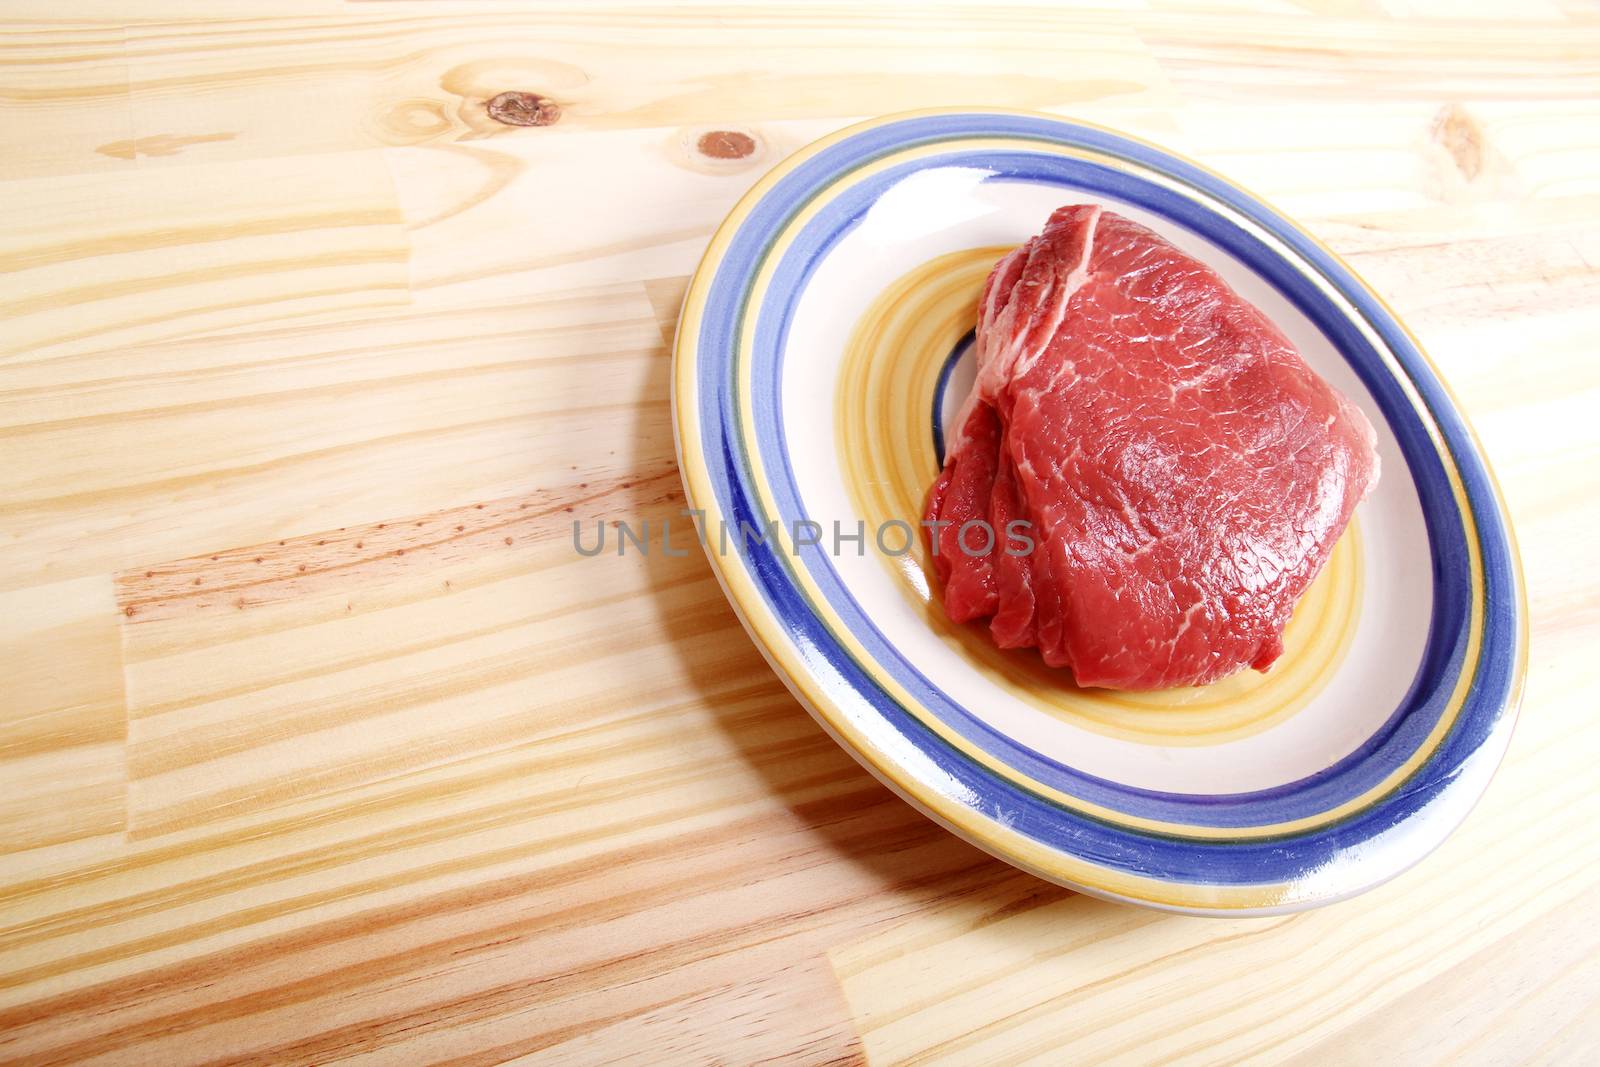 Some raw meat on a Plate.